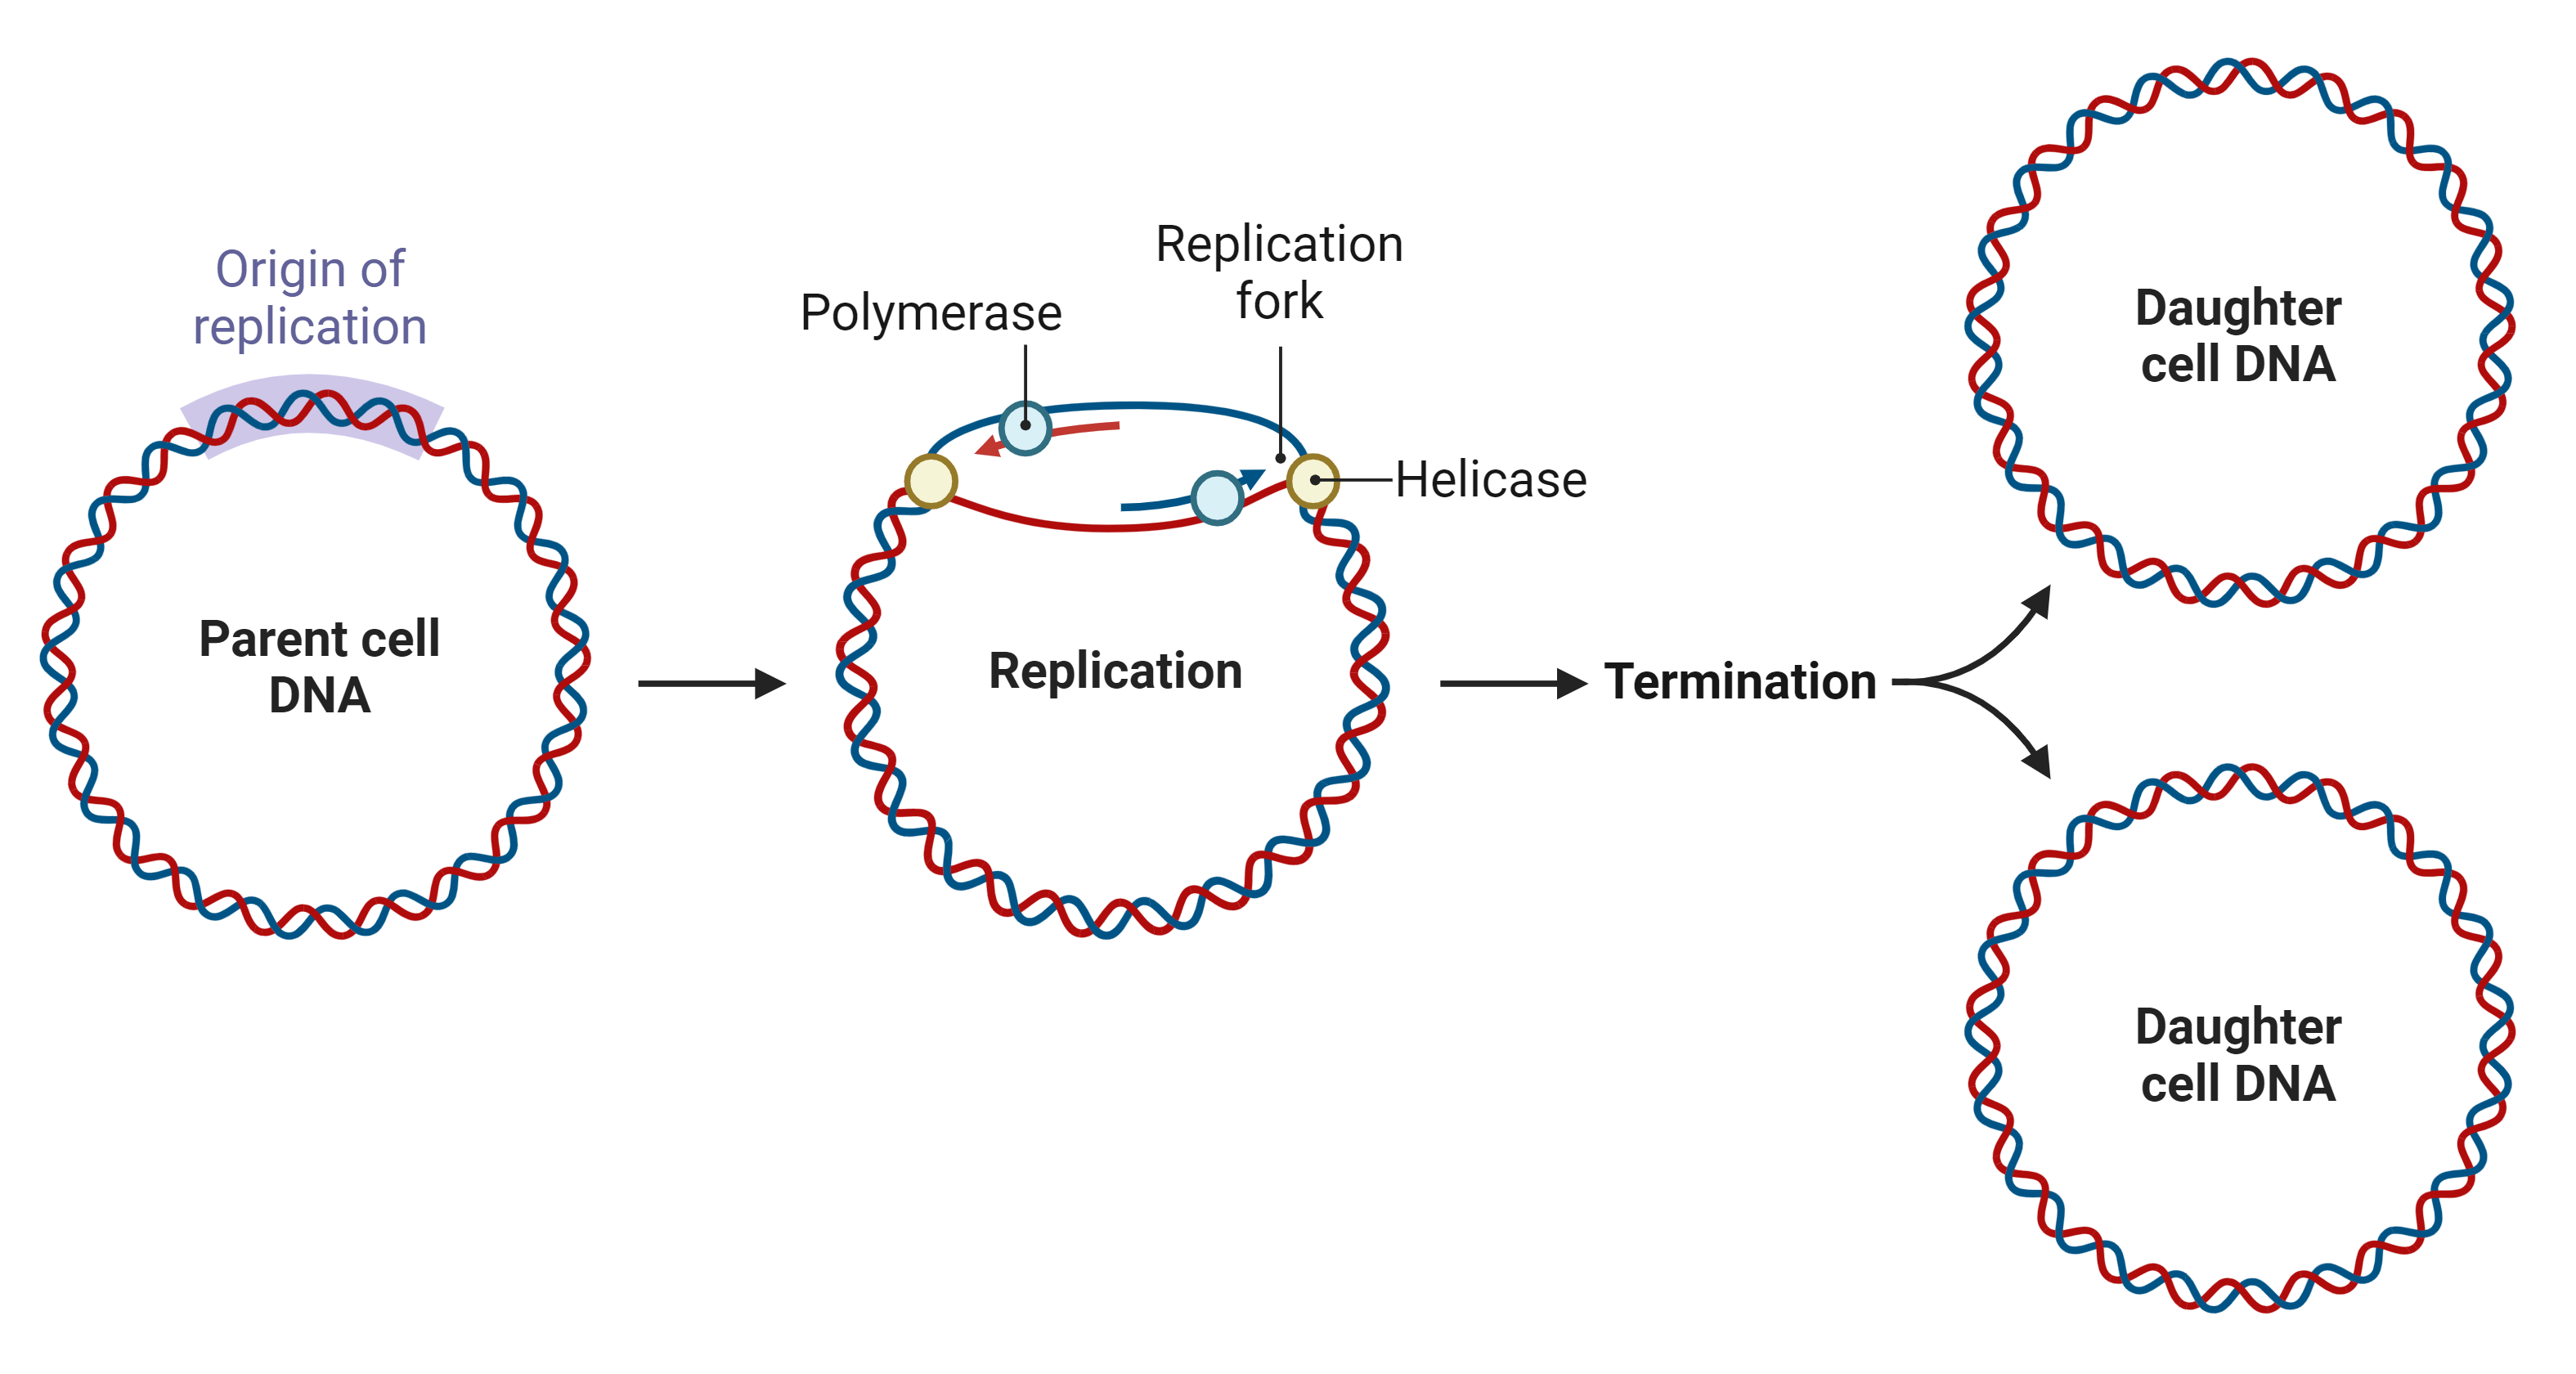 A cartoon schematic of prokaryotic chromosomal replication. The parent cell DNA is shown as a circular chromosome with a small region highlighted as the origin of replication, or ori.   During replication, the DNA helix has separated at the ori, creating a “bubble” of two single strands of DNA. The point of separation of the helix into these single strands is the replication fork. Two replication forks form on either end of the ori. At each replication fork, a helicase processively separates the DNA strands, and a polymerase synthesizes a new DNA strand paired to each single parent strand.  After termination, which is not shown in detail, the process results in two identical daughter cell DNA chromosomes.